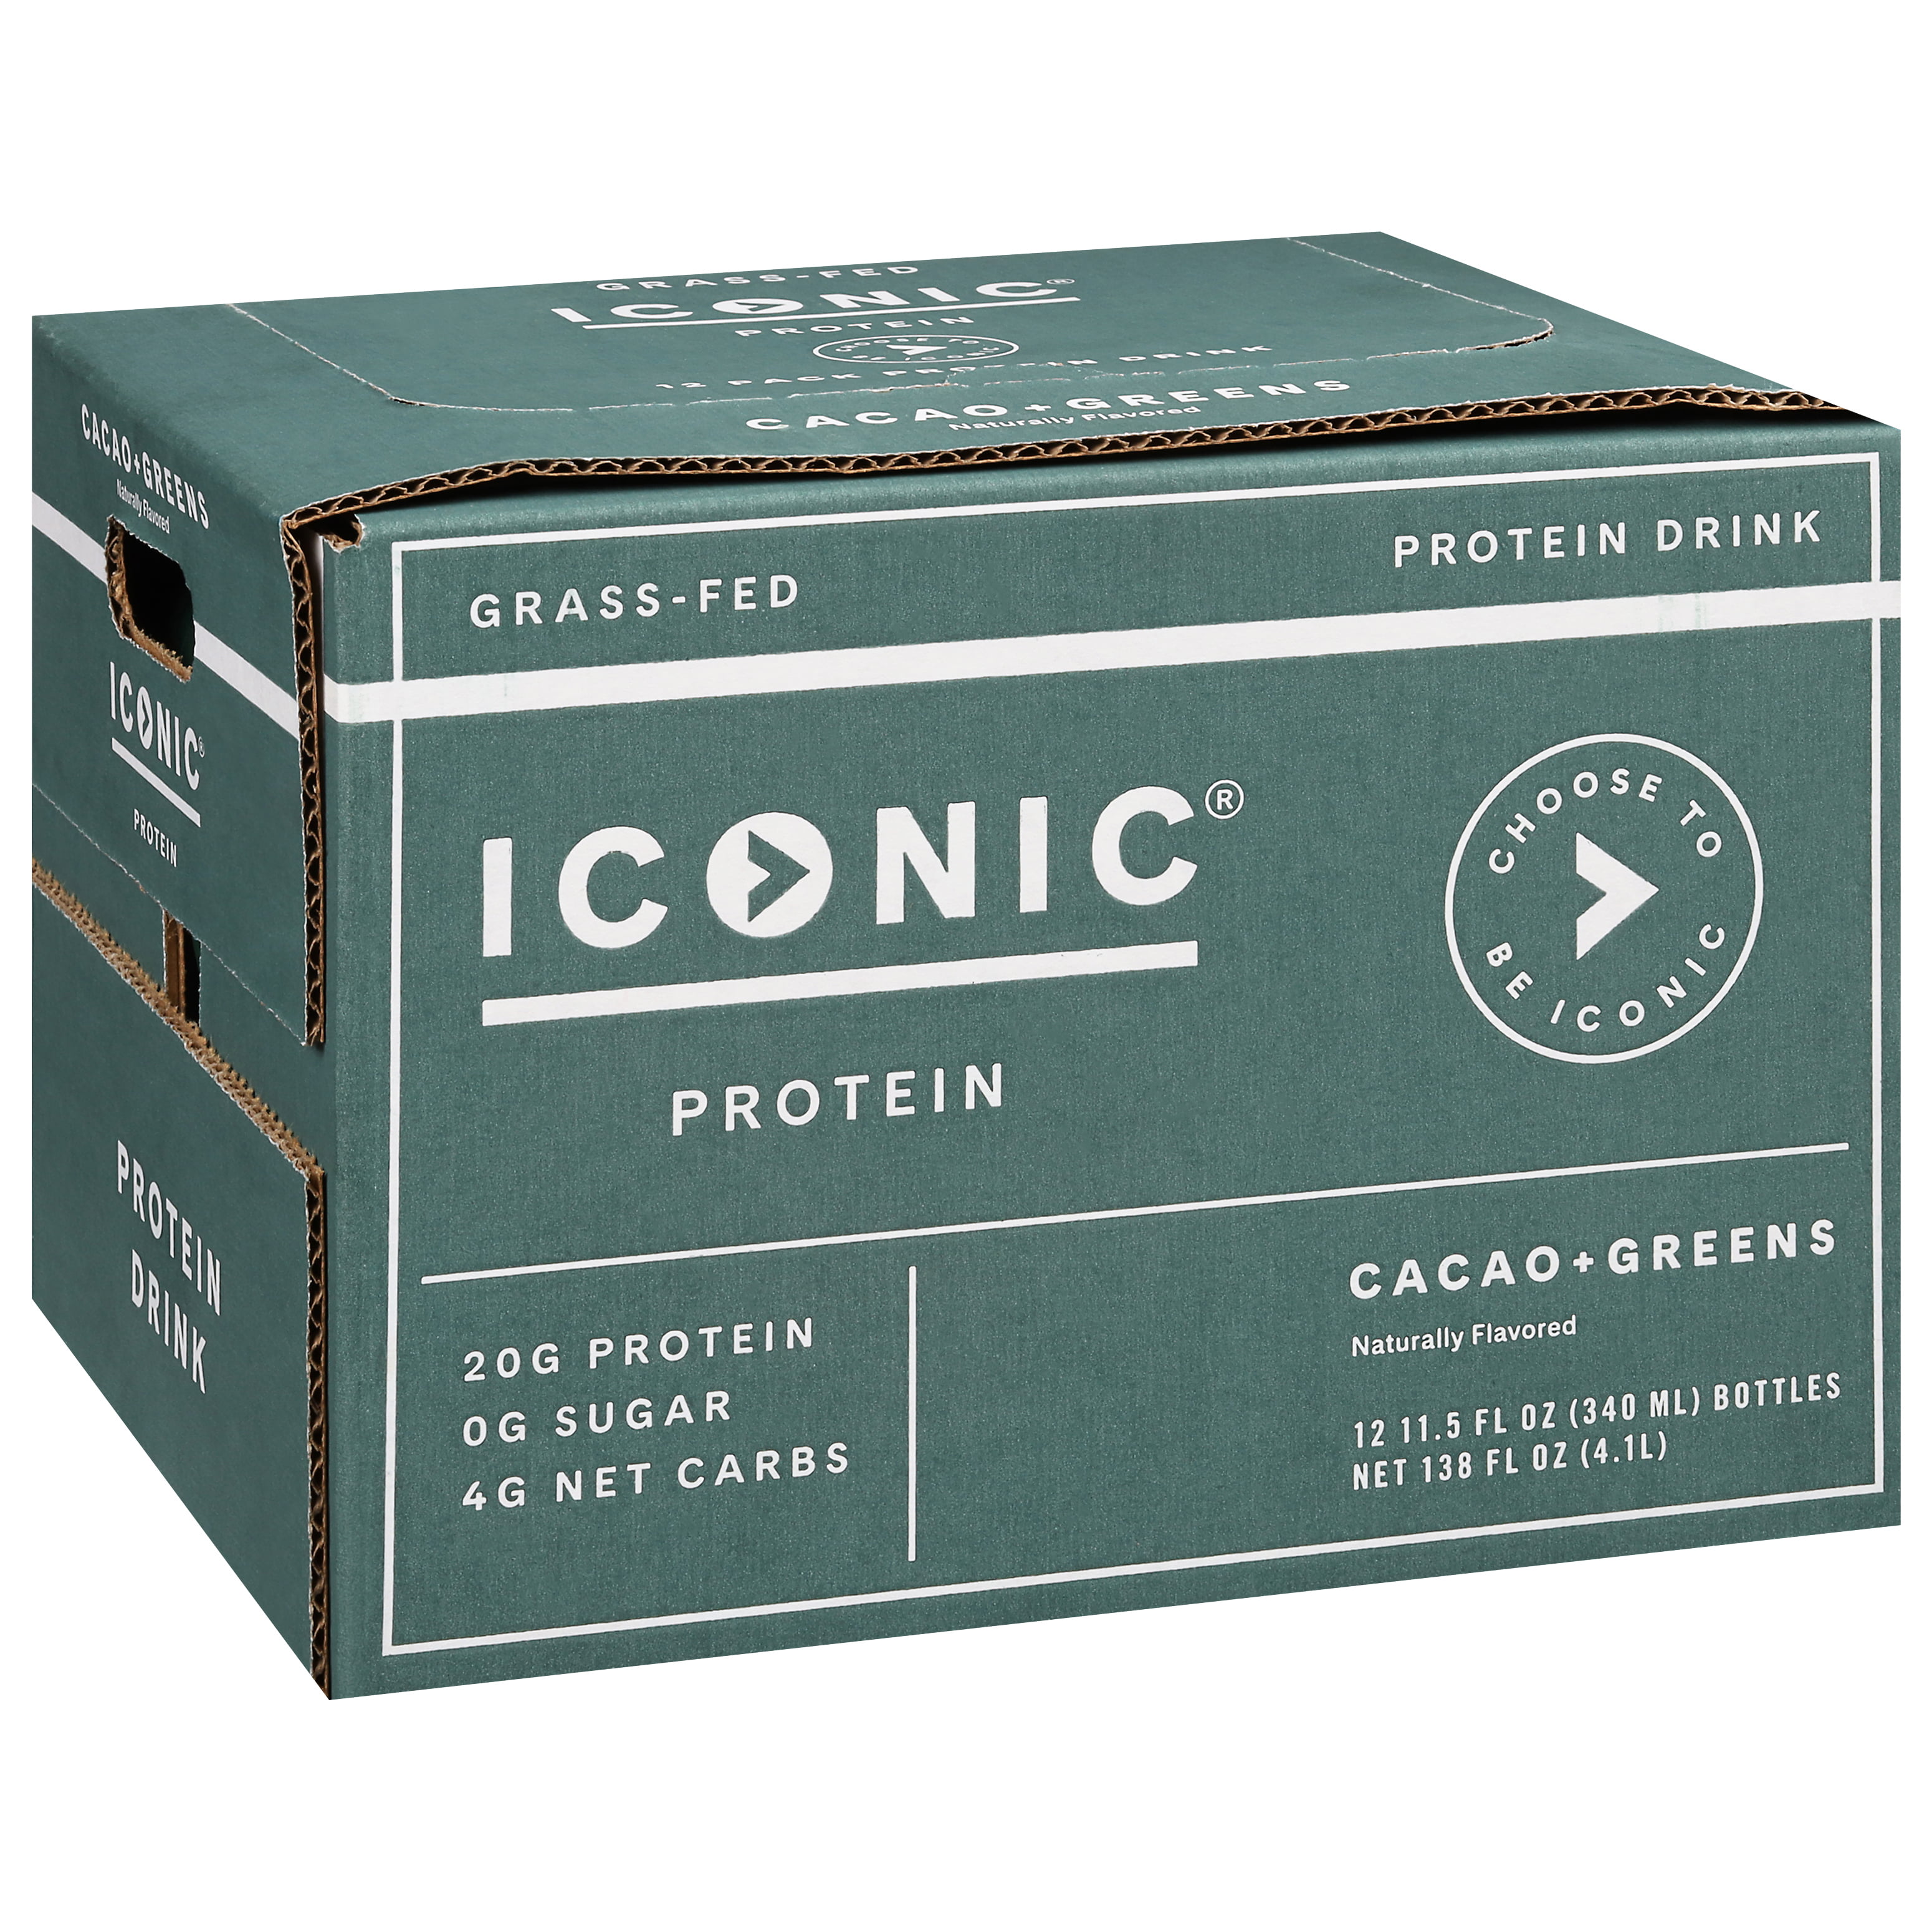  Iconic Protein Drinks, Chocolate Truffle (12 Pack) - Sugar  Free & Low Carb - 20g Grass Fed Protein - Lactose Free, Gluten Free,  Non-GMO, Kosher - Keto Friendly Protein Shakes 